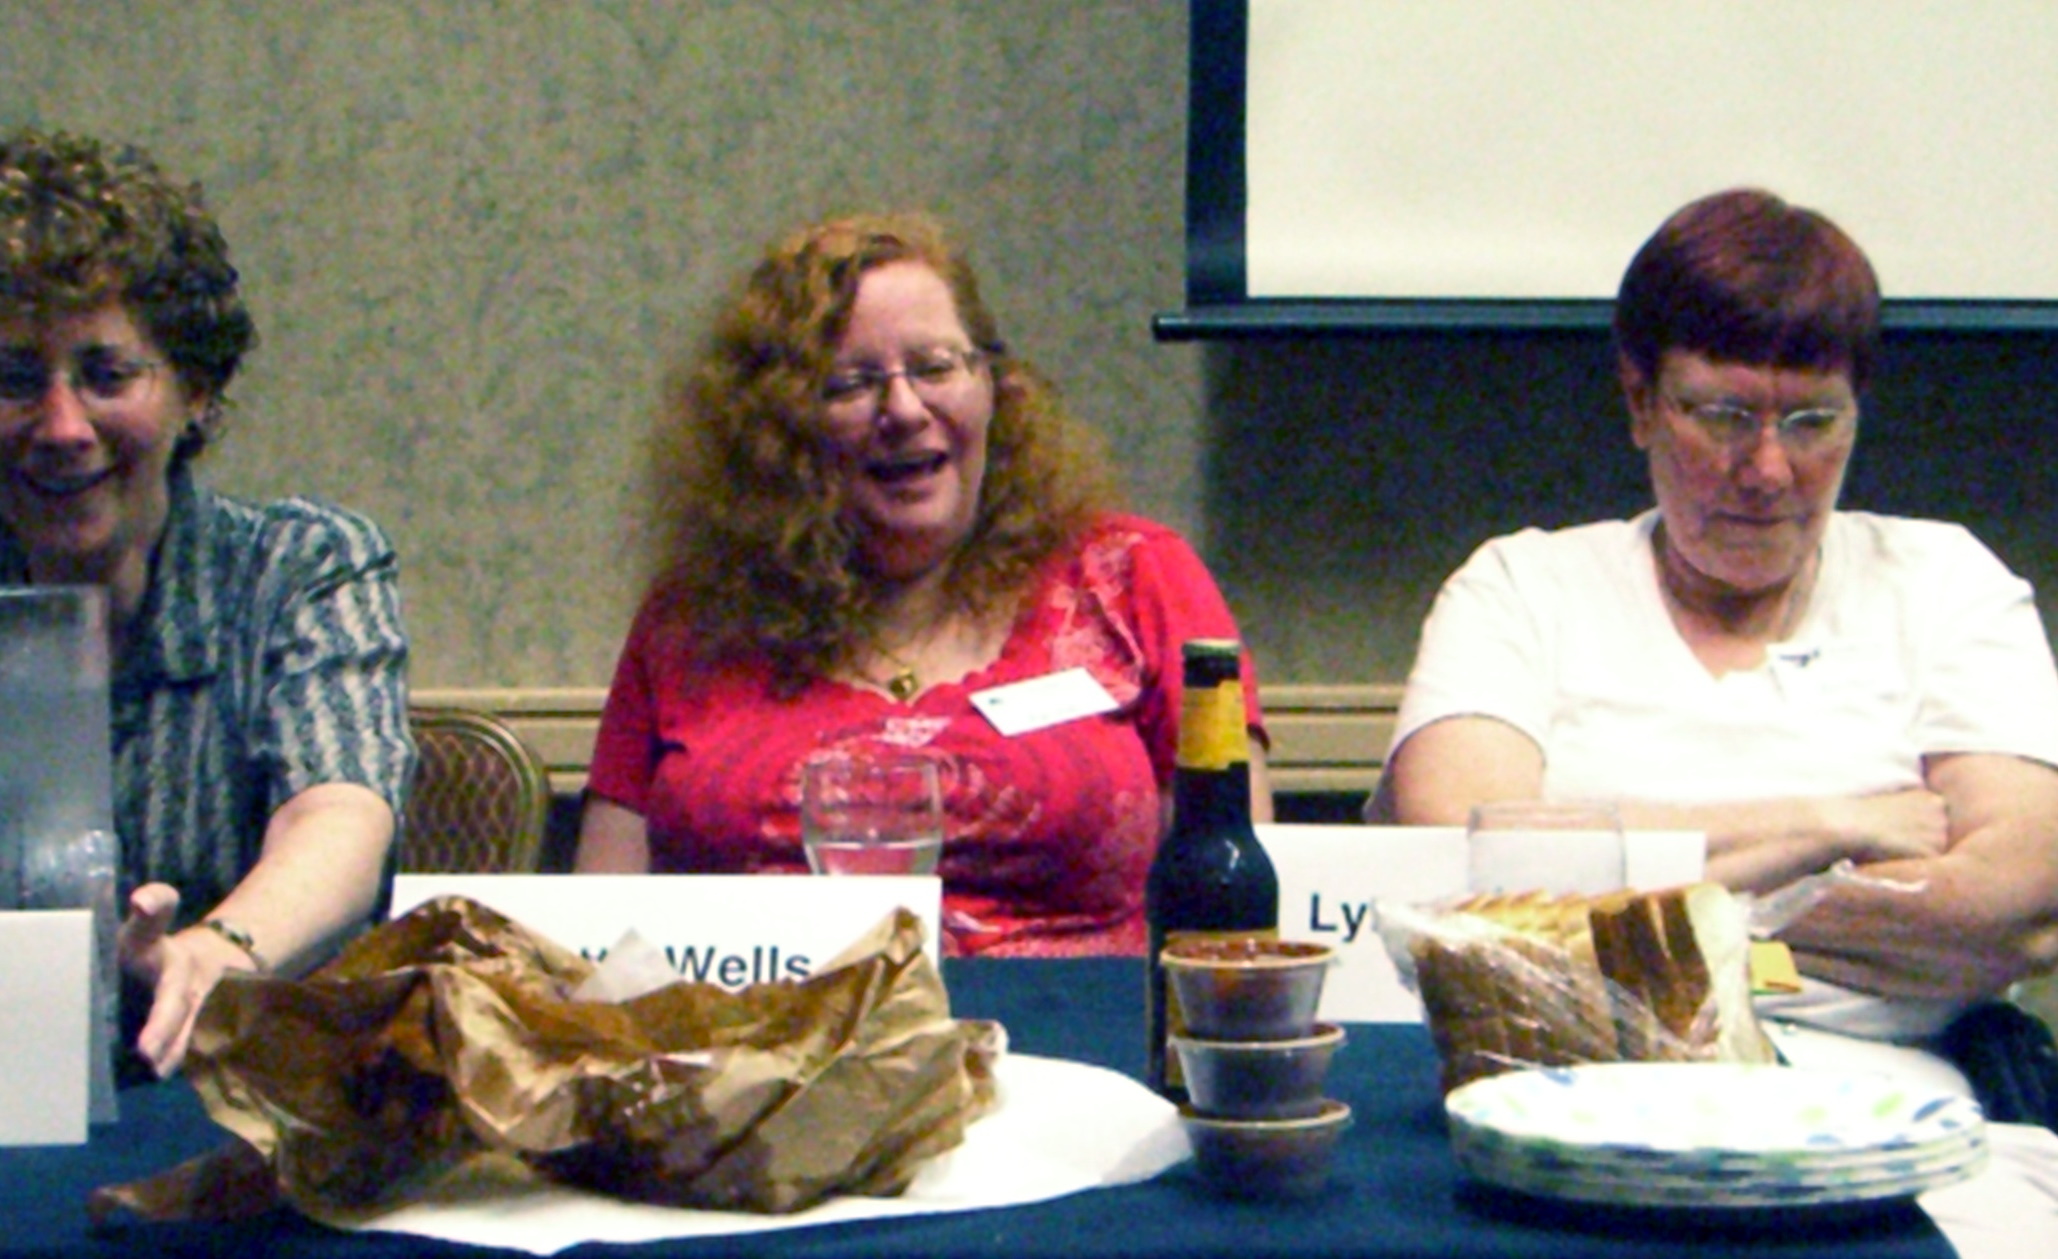 Con disaster stories panelists, left to right, Janice Gelb, Patty Wells, and Lynn Ward, behind the barbeque leftovers